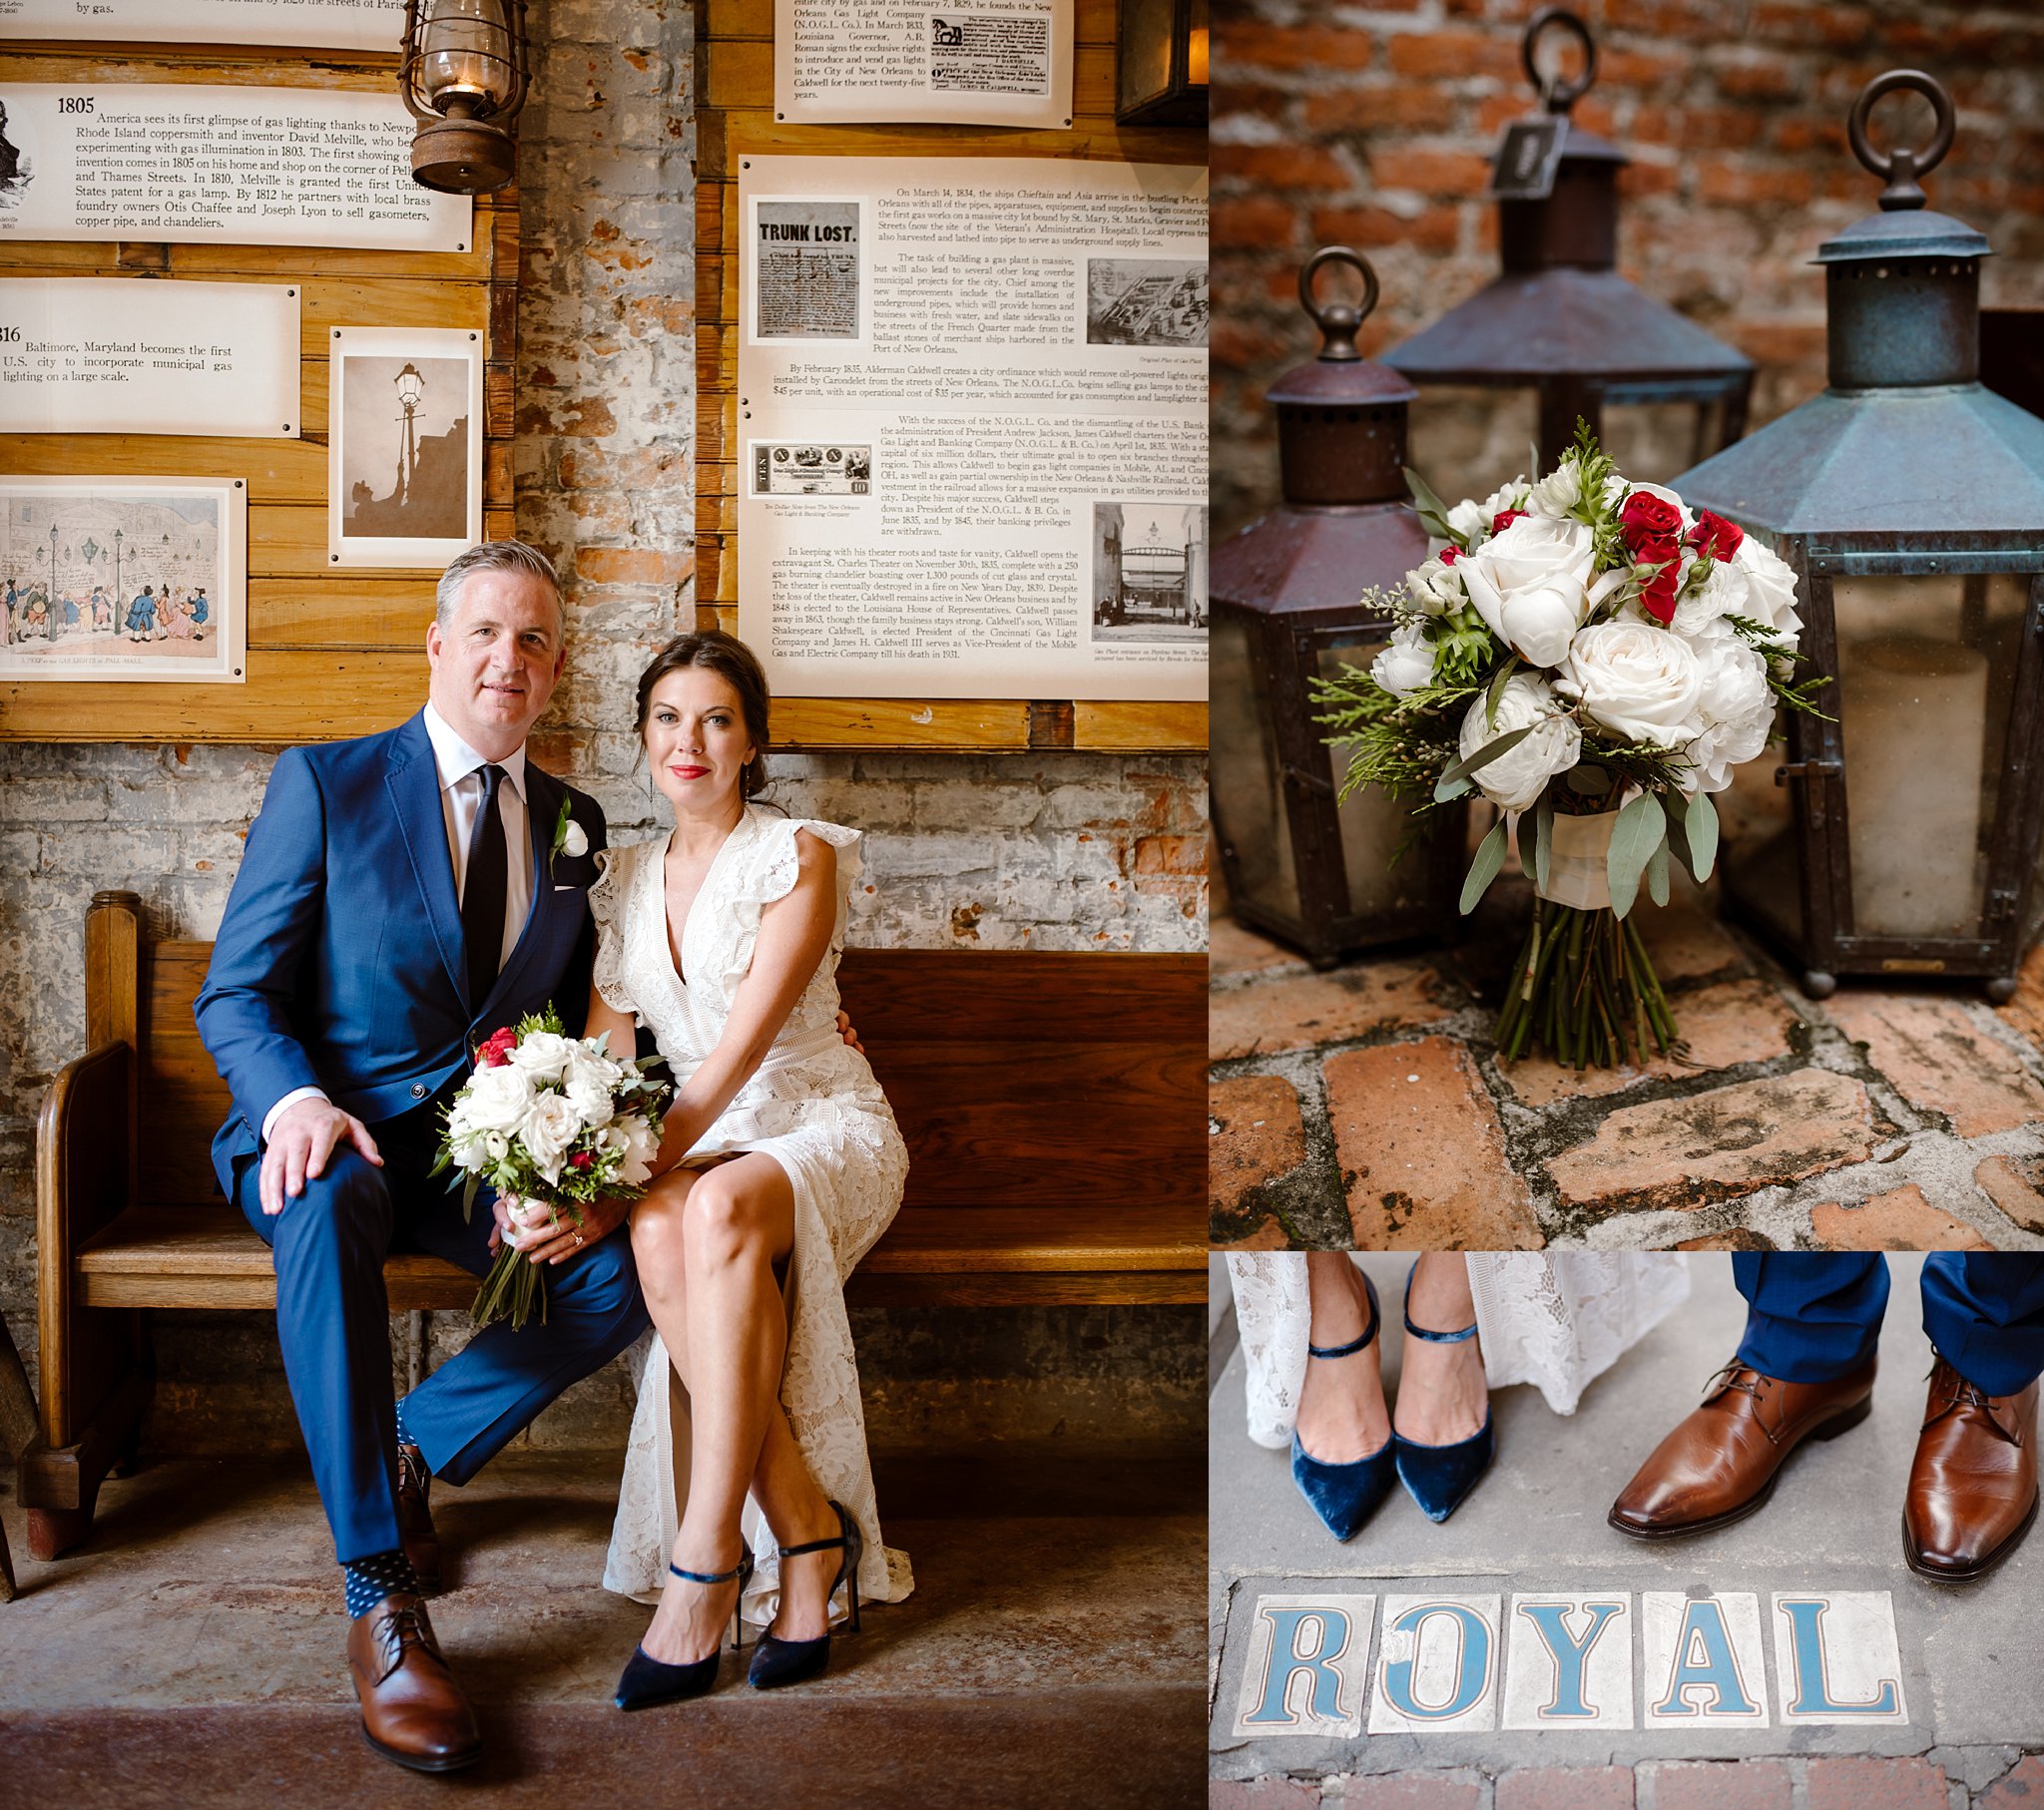 Christmas Elopement at Bevolo Gas Lantern Museum in New Orleans